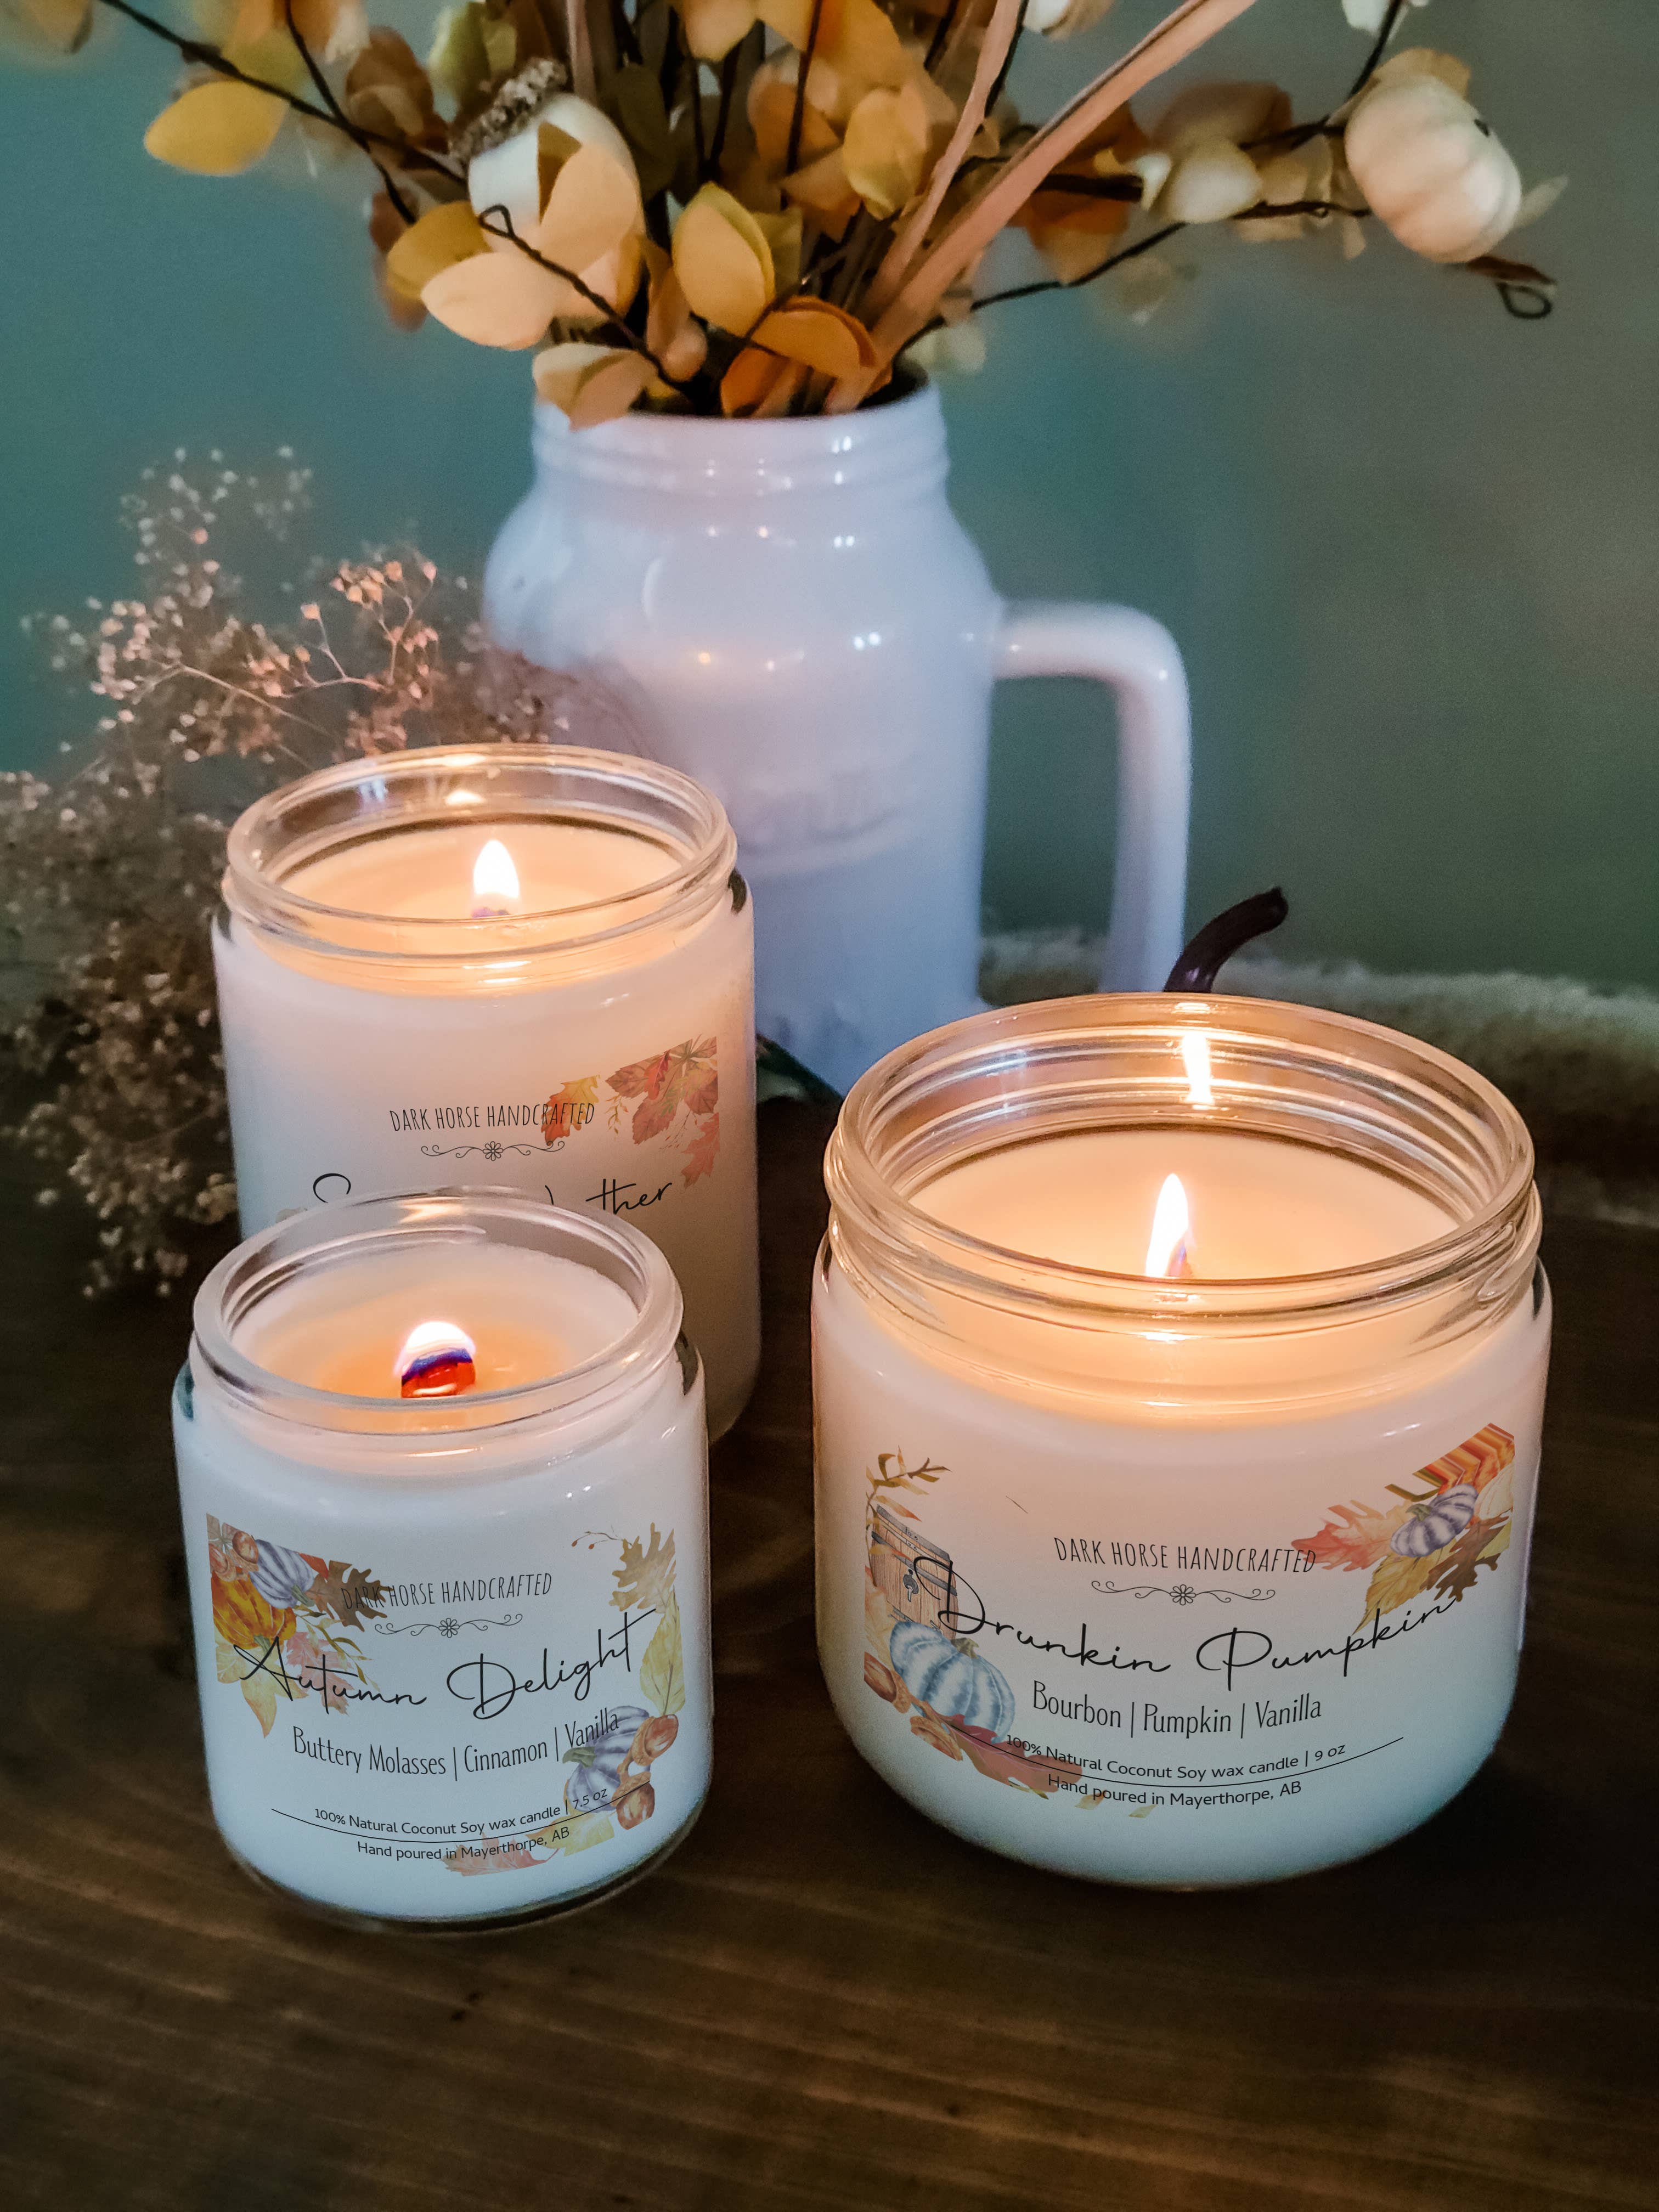 Autumn Delight - Fall season, Natural Coconut Soy Candle